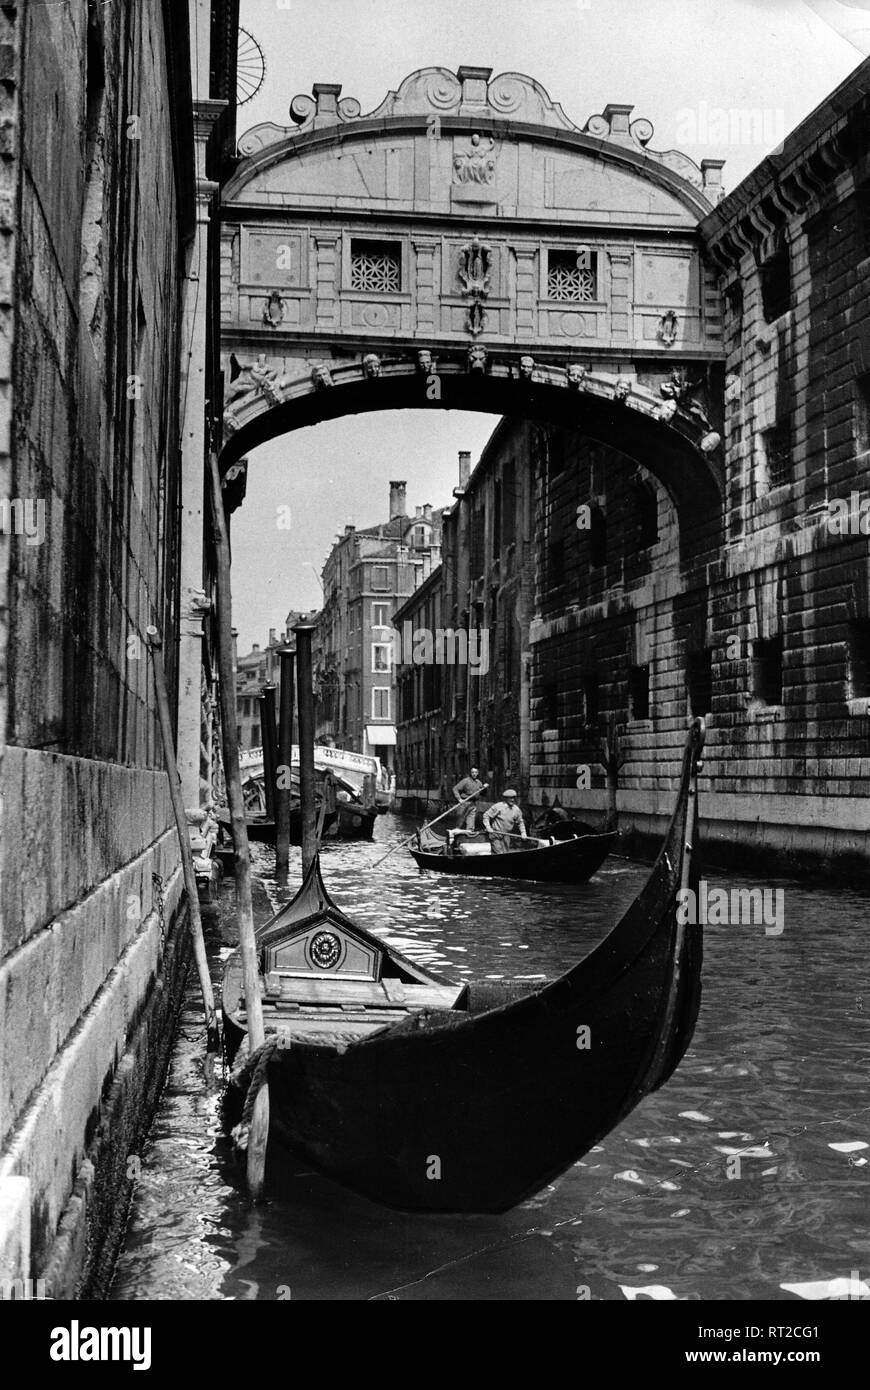 Travel to Italy - Italy in 1950s - view to the legendary Bridge of Sighs - Ponte dei Sospiri, passes over the Palace River (Rio di Palazzo) and connects the Old Prison in Venice. Photo taken in 1954 by Erich Andres Stock Photo